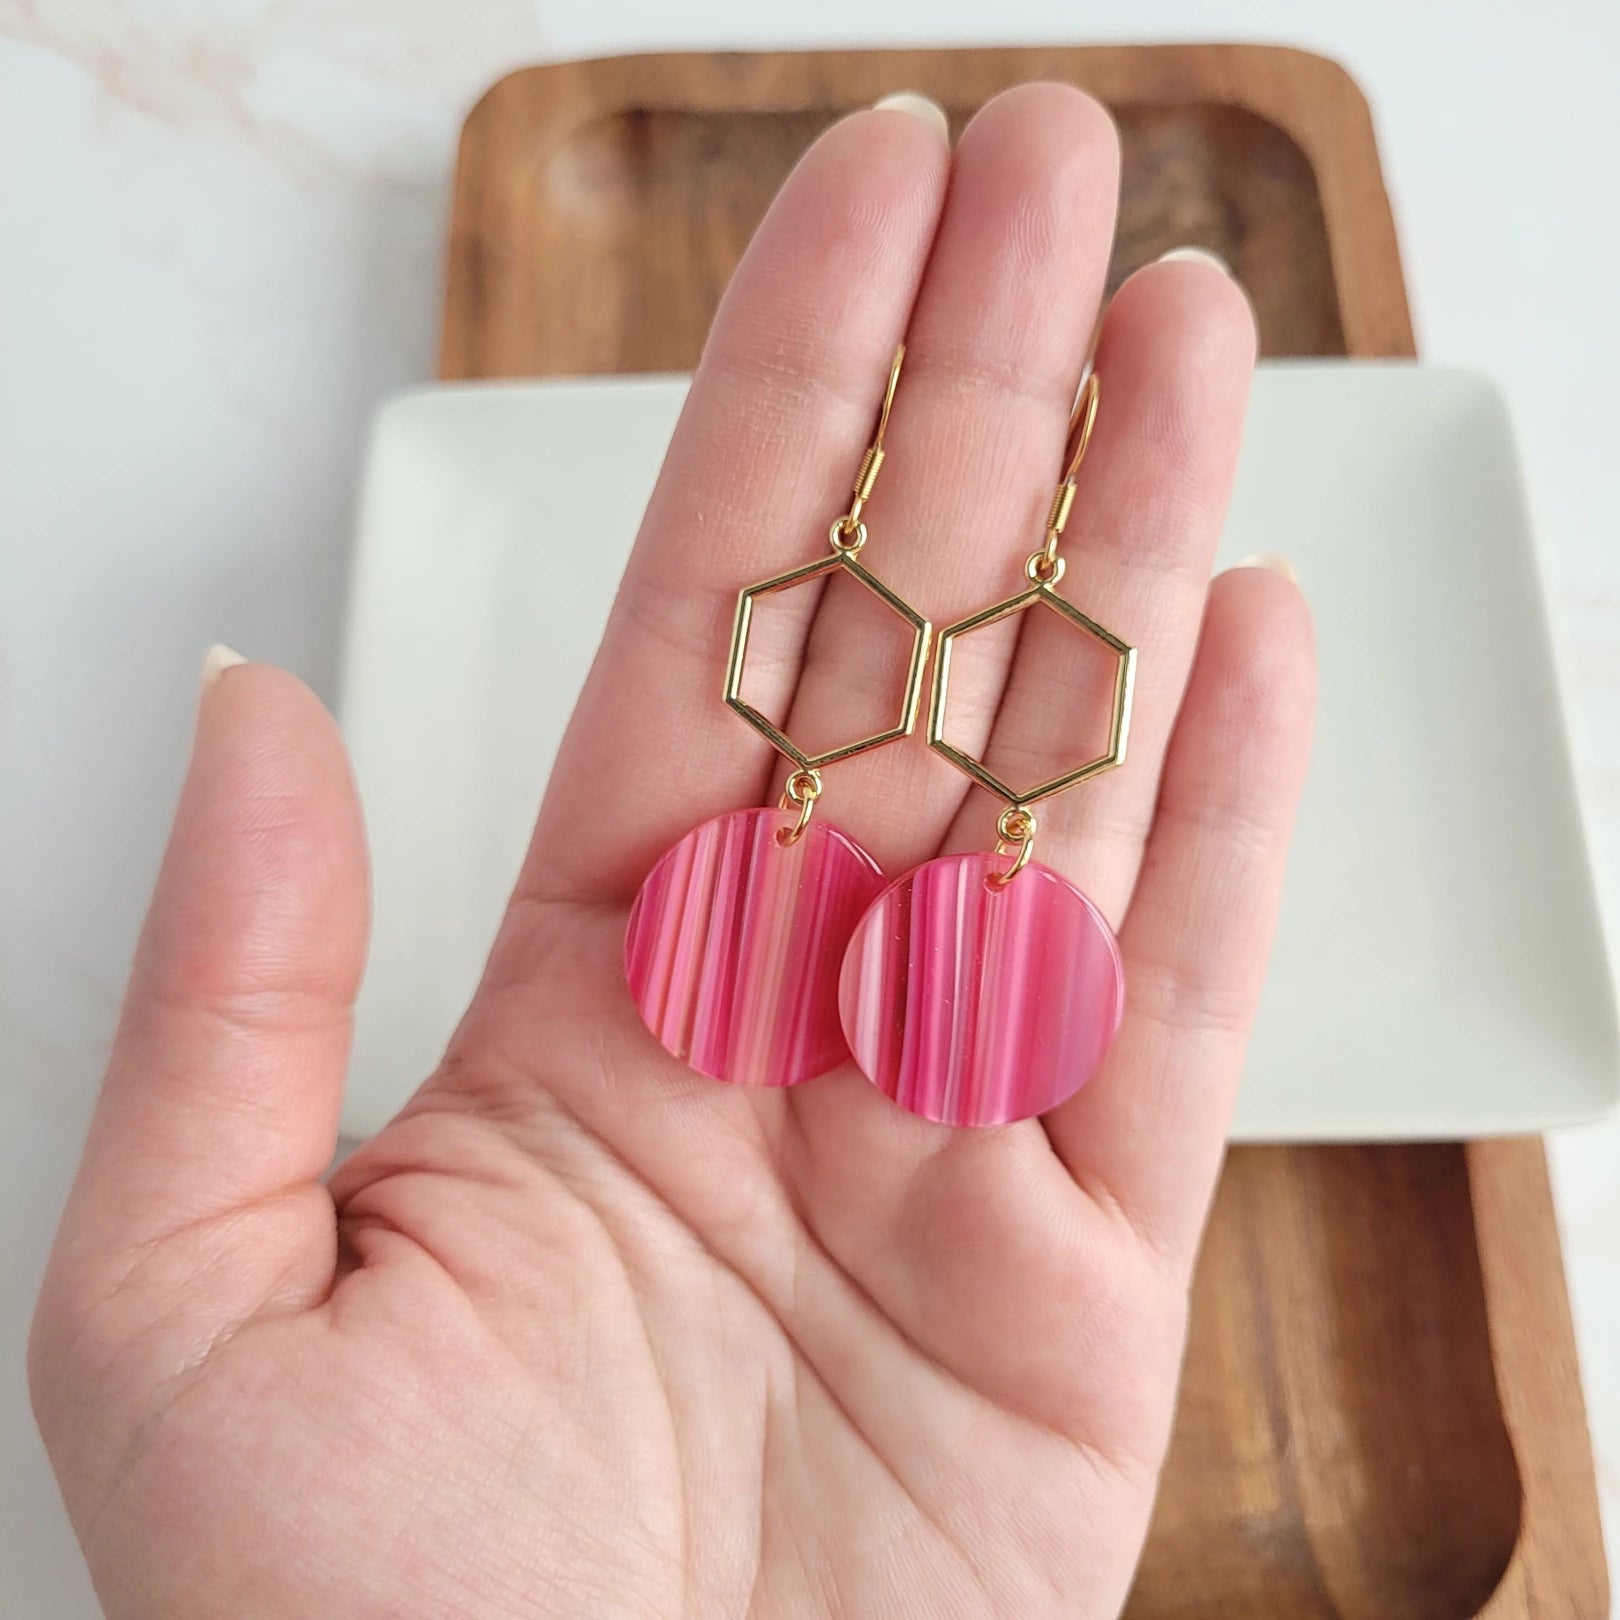 Flaunt your sophistication with a perfect pair of Layla Earrings! Our gold hexagon accent and beautiful acrylic will instantly elevate any outfit - getting you ready to take on the day like a boss. Put ‘em on, and watch the compliments roll in! (And you thought hexagons were just for math class.)